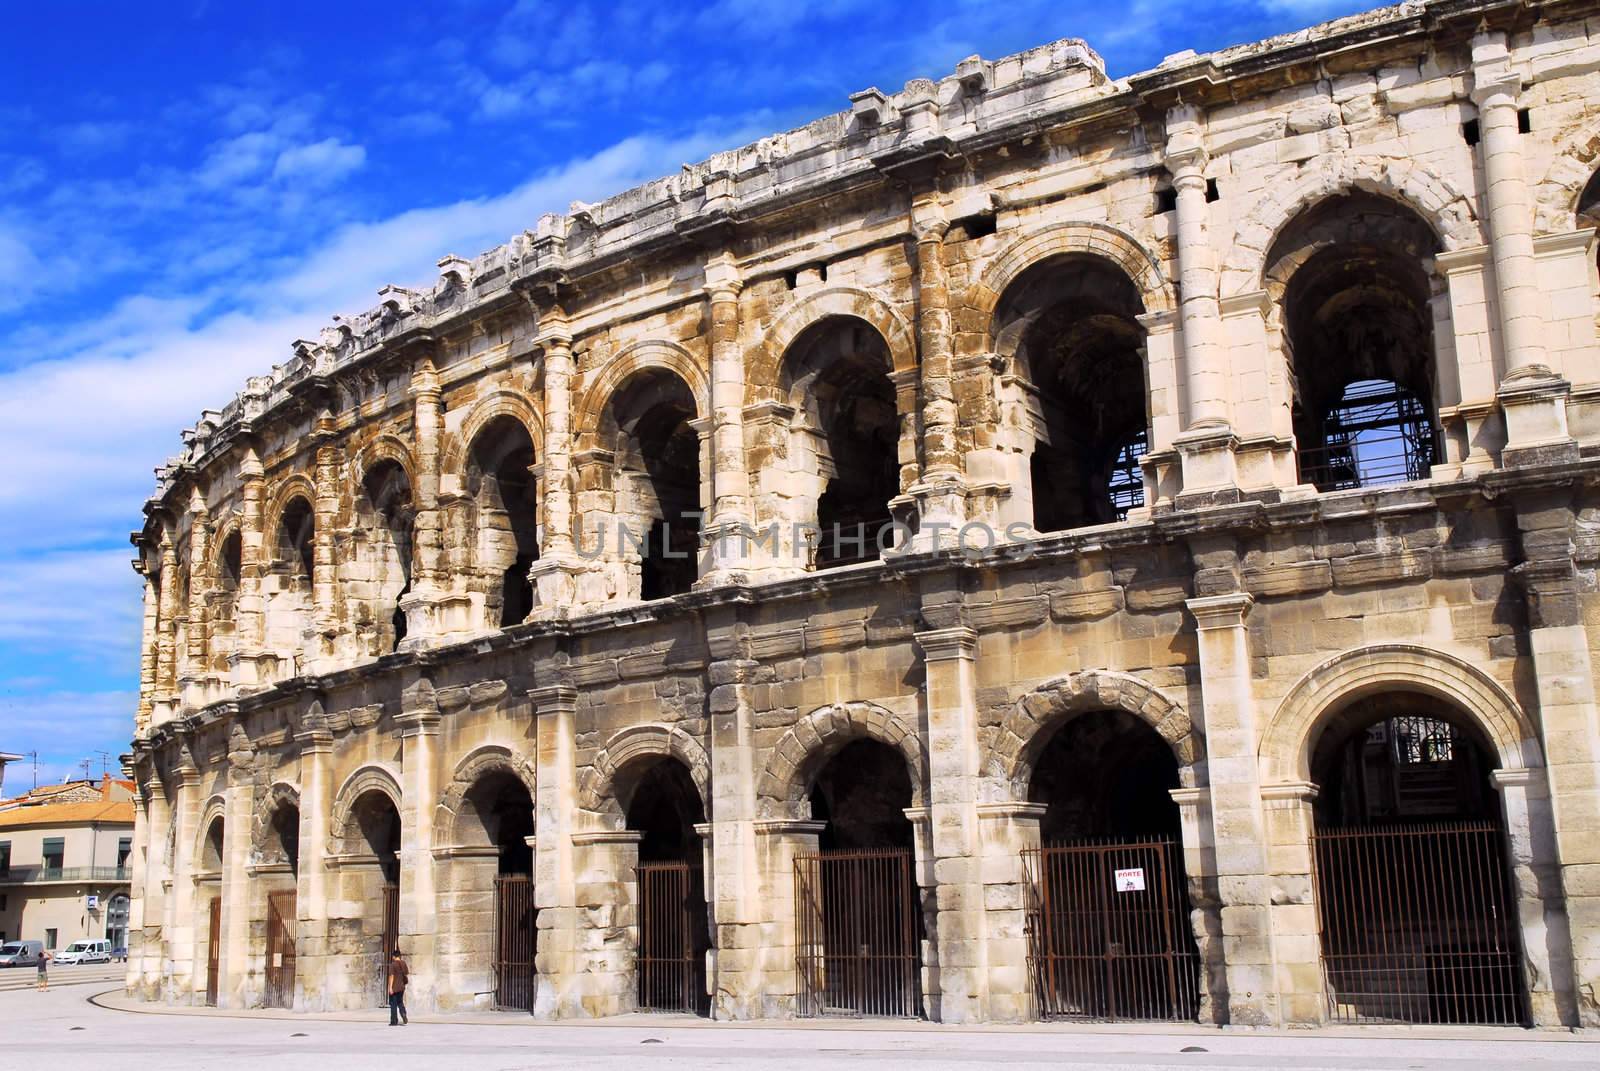 Roman arena in Nimes France by elenathewise